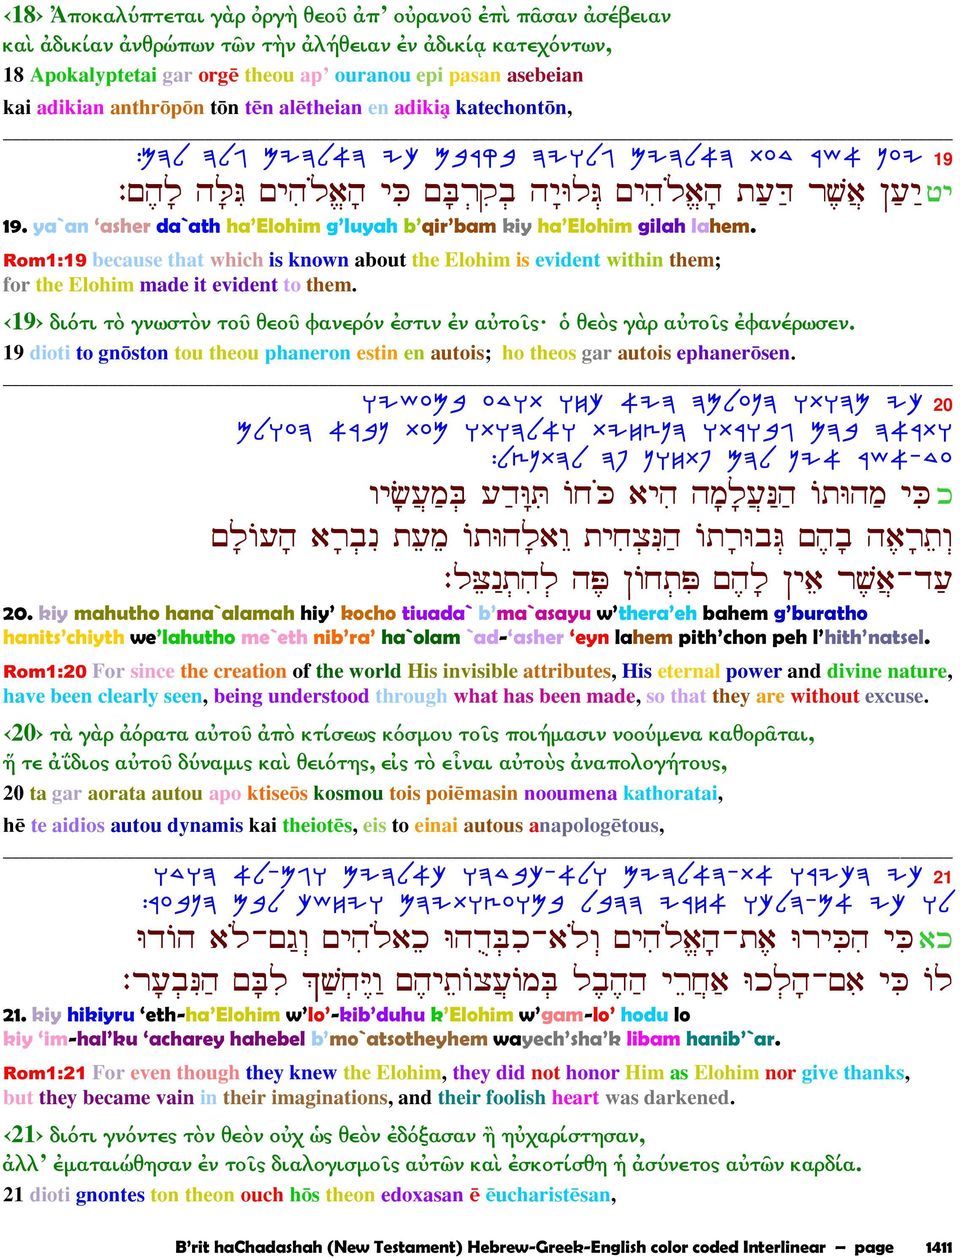 ya`an asher da`ath ha Elohim g luyah b qir bam kiy ha Elohim gilah lahem. Rom1:19 because that which is known about the Elohim is evident within them; for the Elohim made it evident to them.